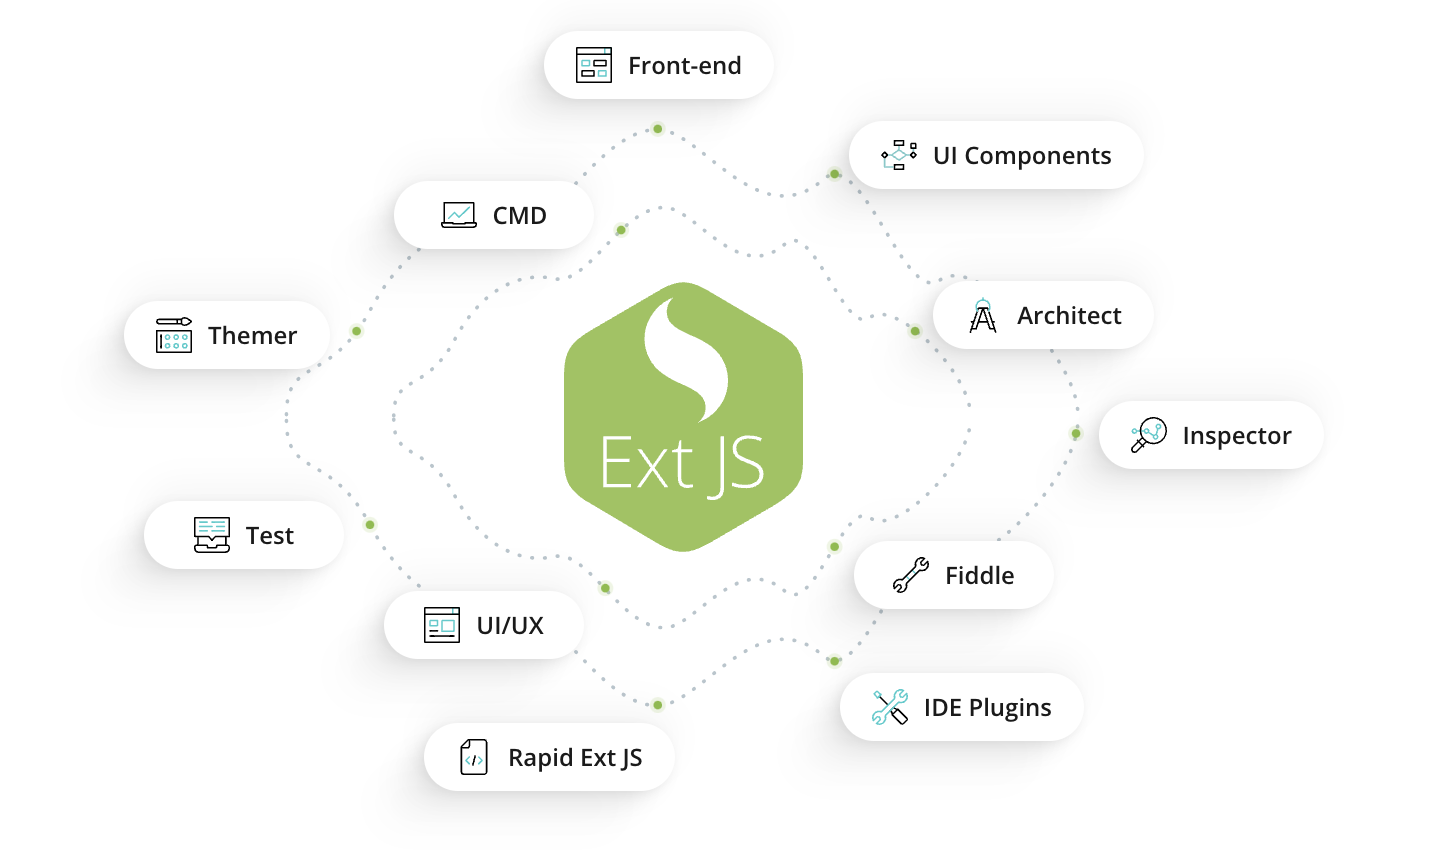 JS frameworks - Sencha Ext JS - One of most popular JavaScript frameworks for creating interactive user interfaces and web apps